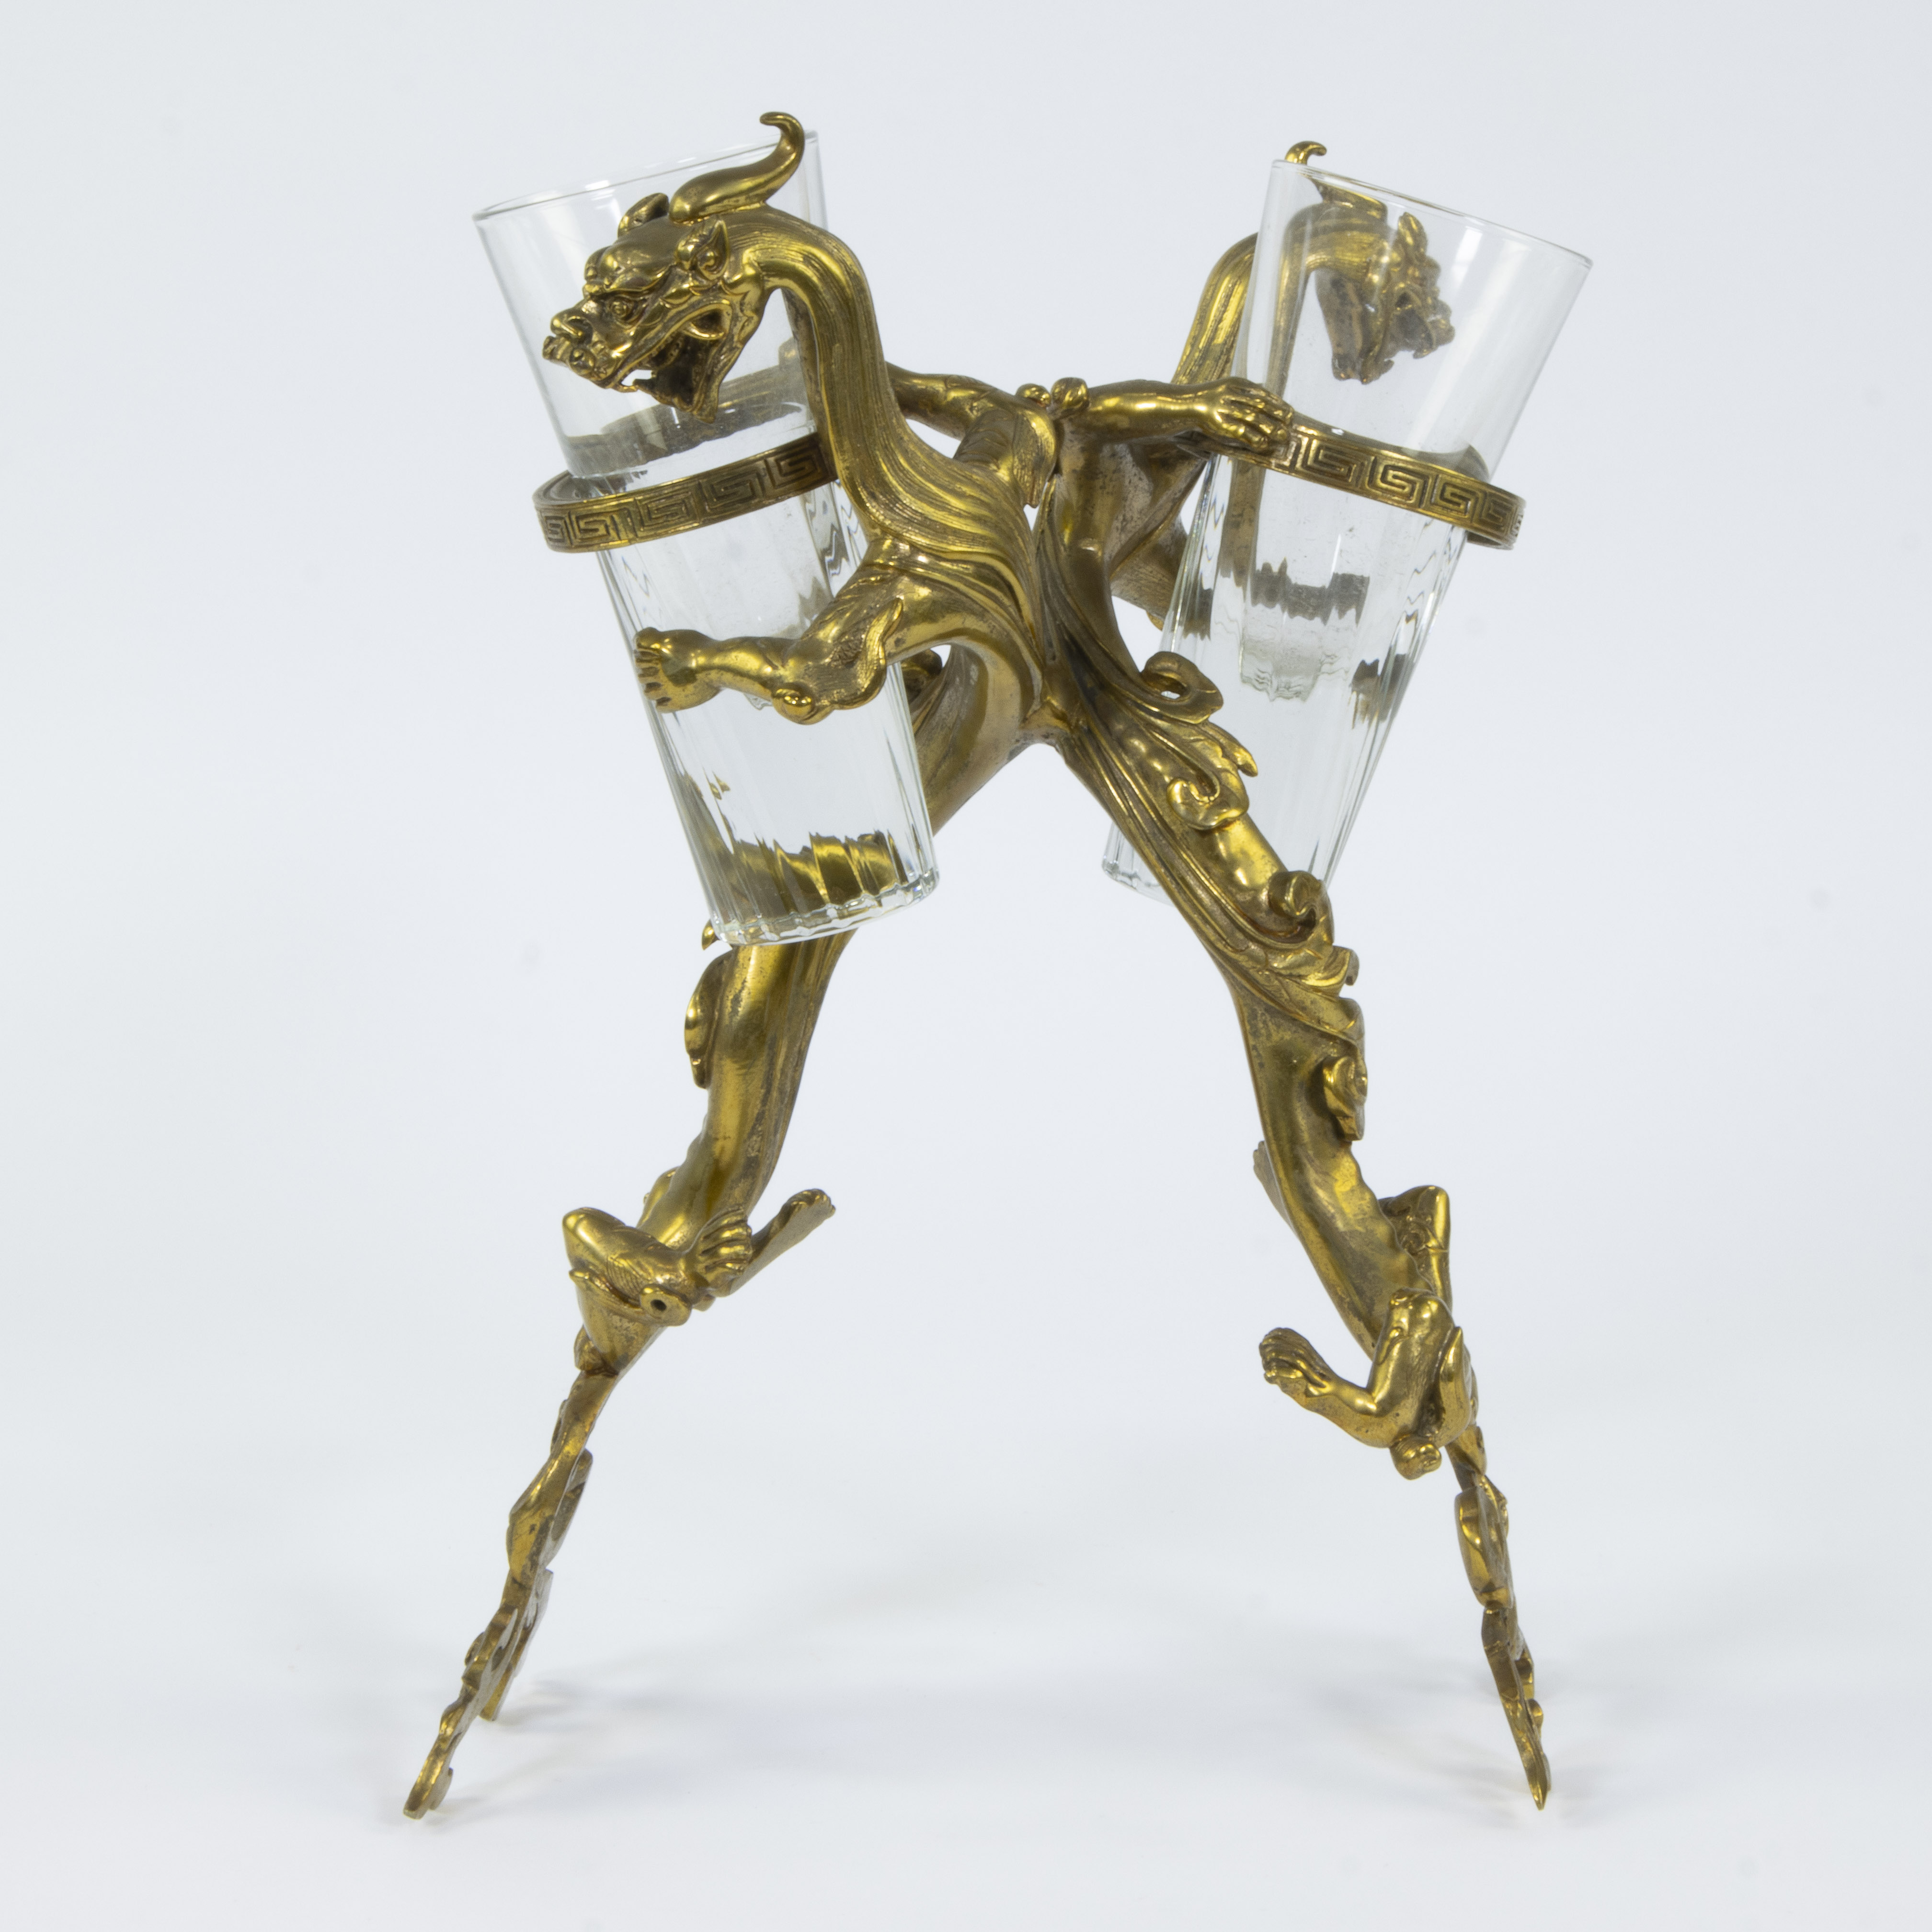 A 'twin' glass holder in gilt bronze in the shape of 2 dragons, circa 1900 - Image 3 of 4